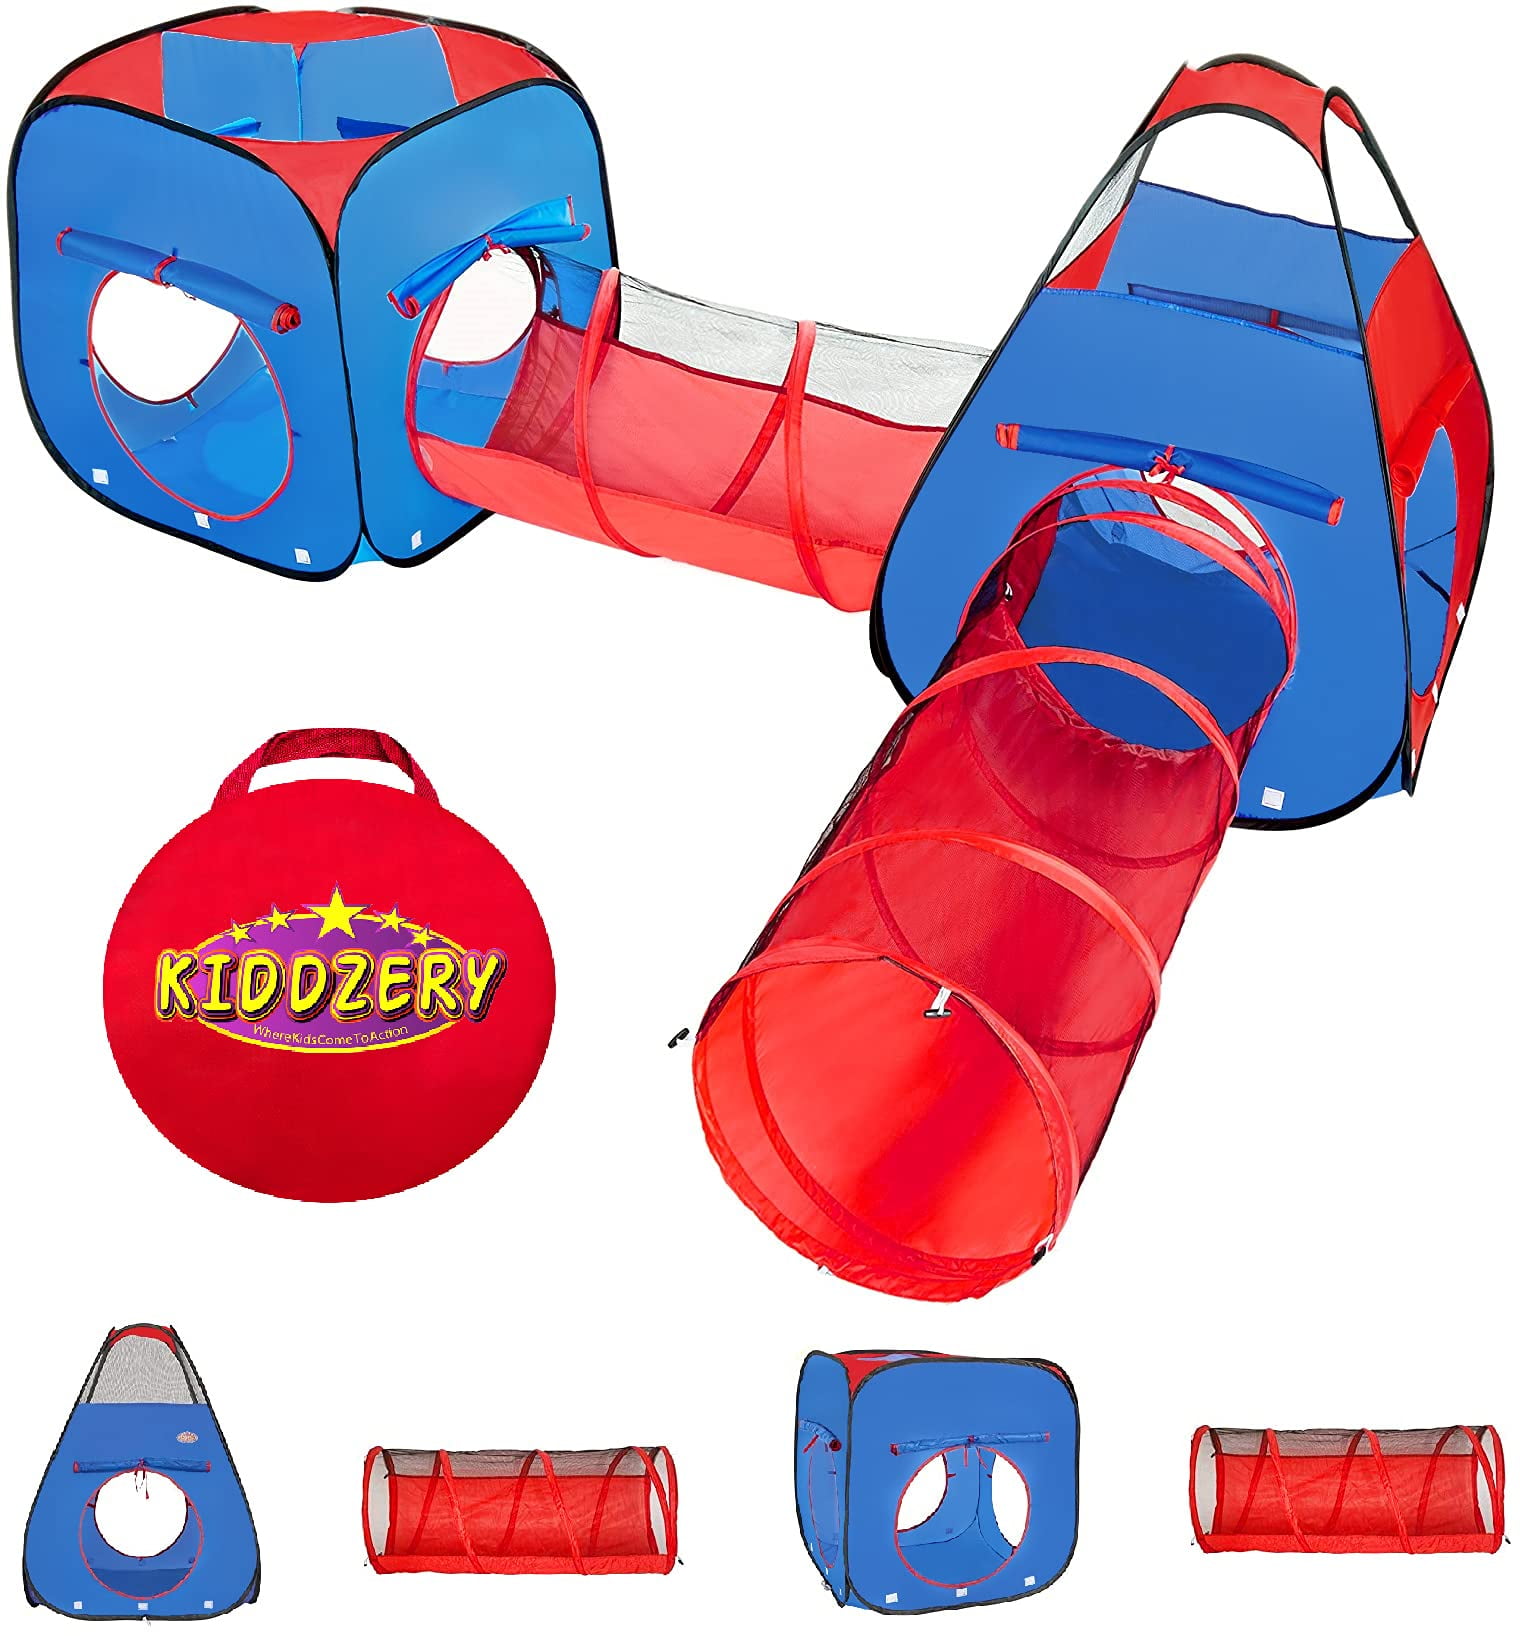 Kiddzery 4pc Kids Play Tent Pop up Ball Pit 2 Tents Crawl Tunnels for sale online 